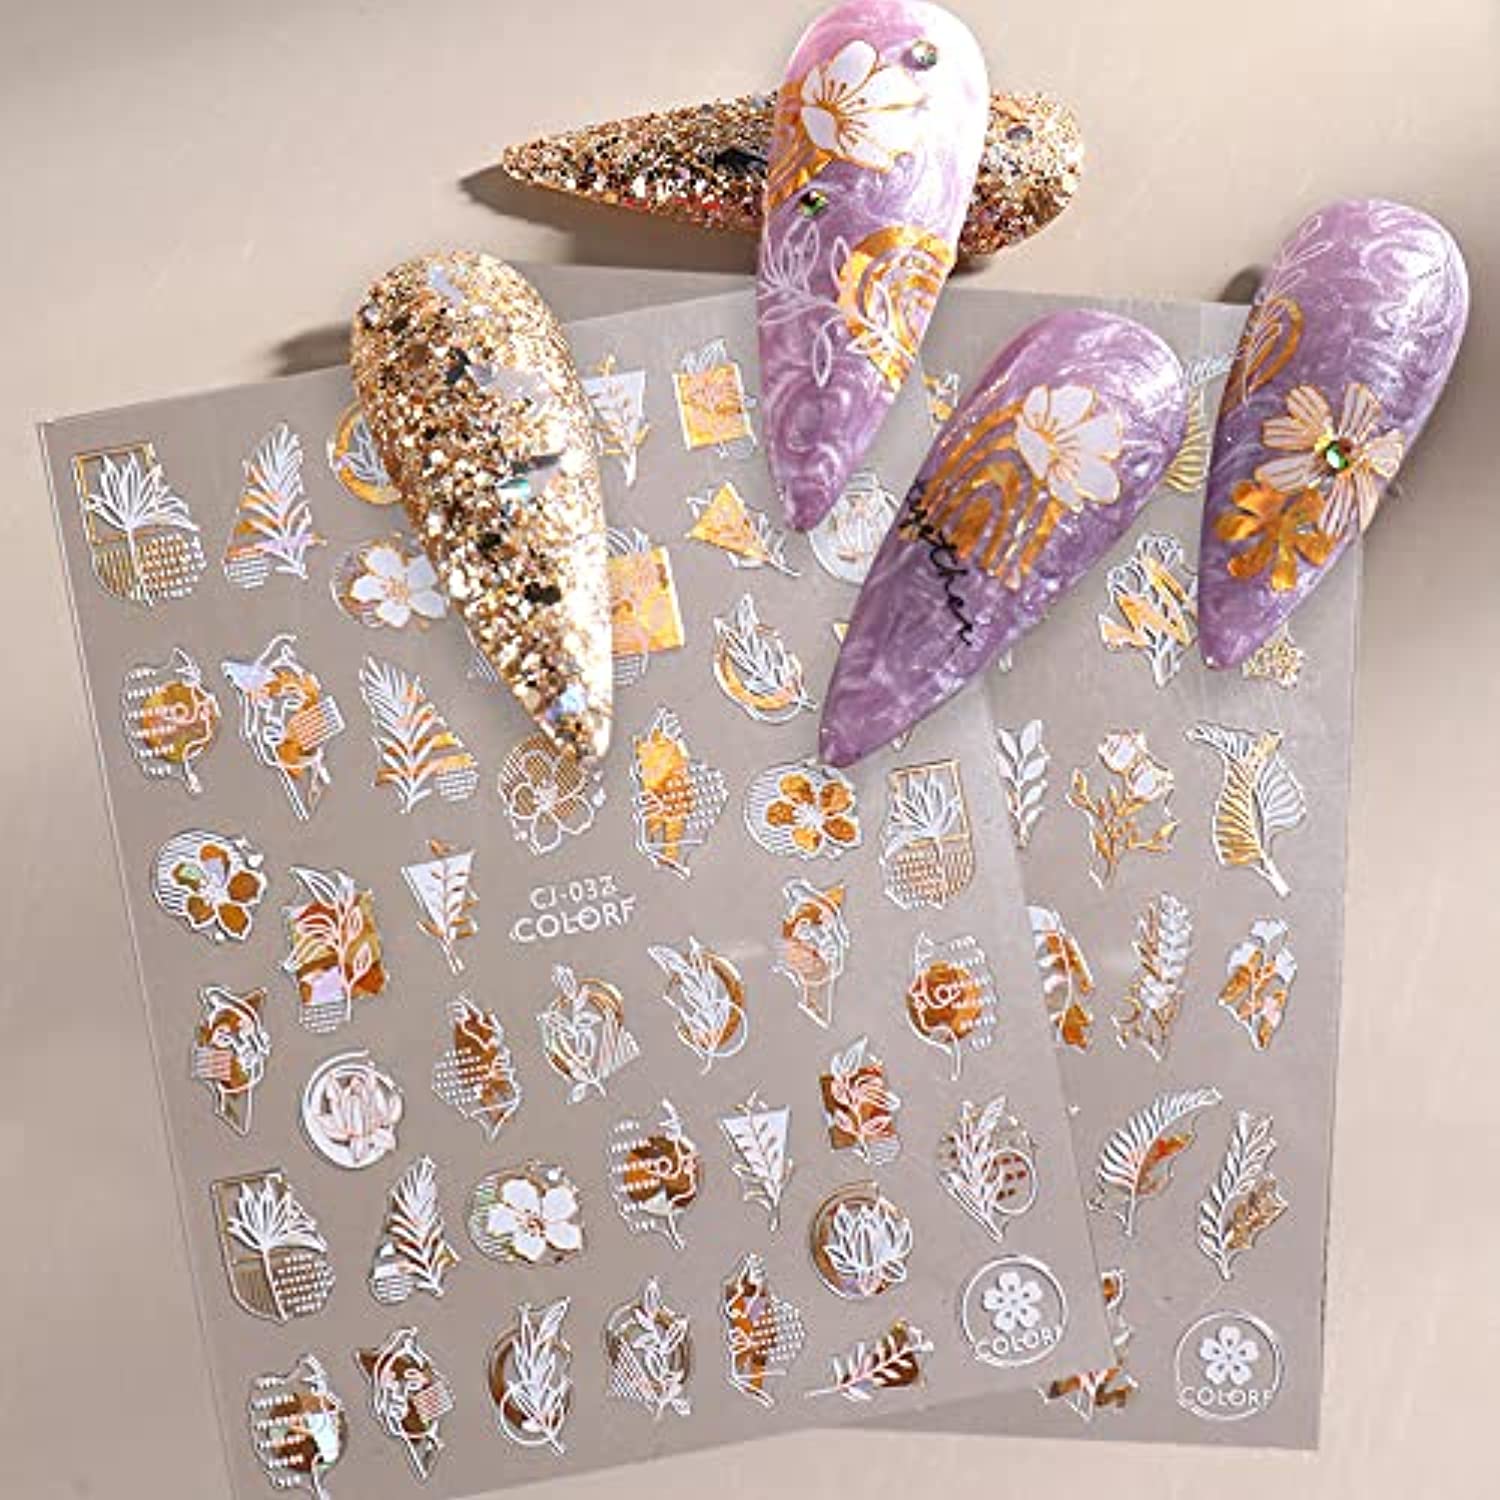 Flower Nail Stickers Holographic Gold White Nail Art Stickers 3D Laser Flowers Leaf Abstract Face Design Nail Decals for Nail Art DIY Acrylic Nail Decorations Manicure Decals for Women Girls 6Sheets